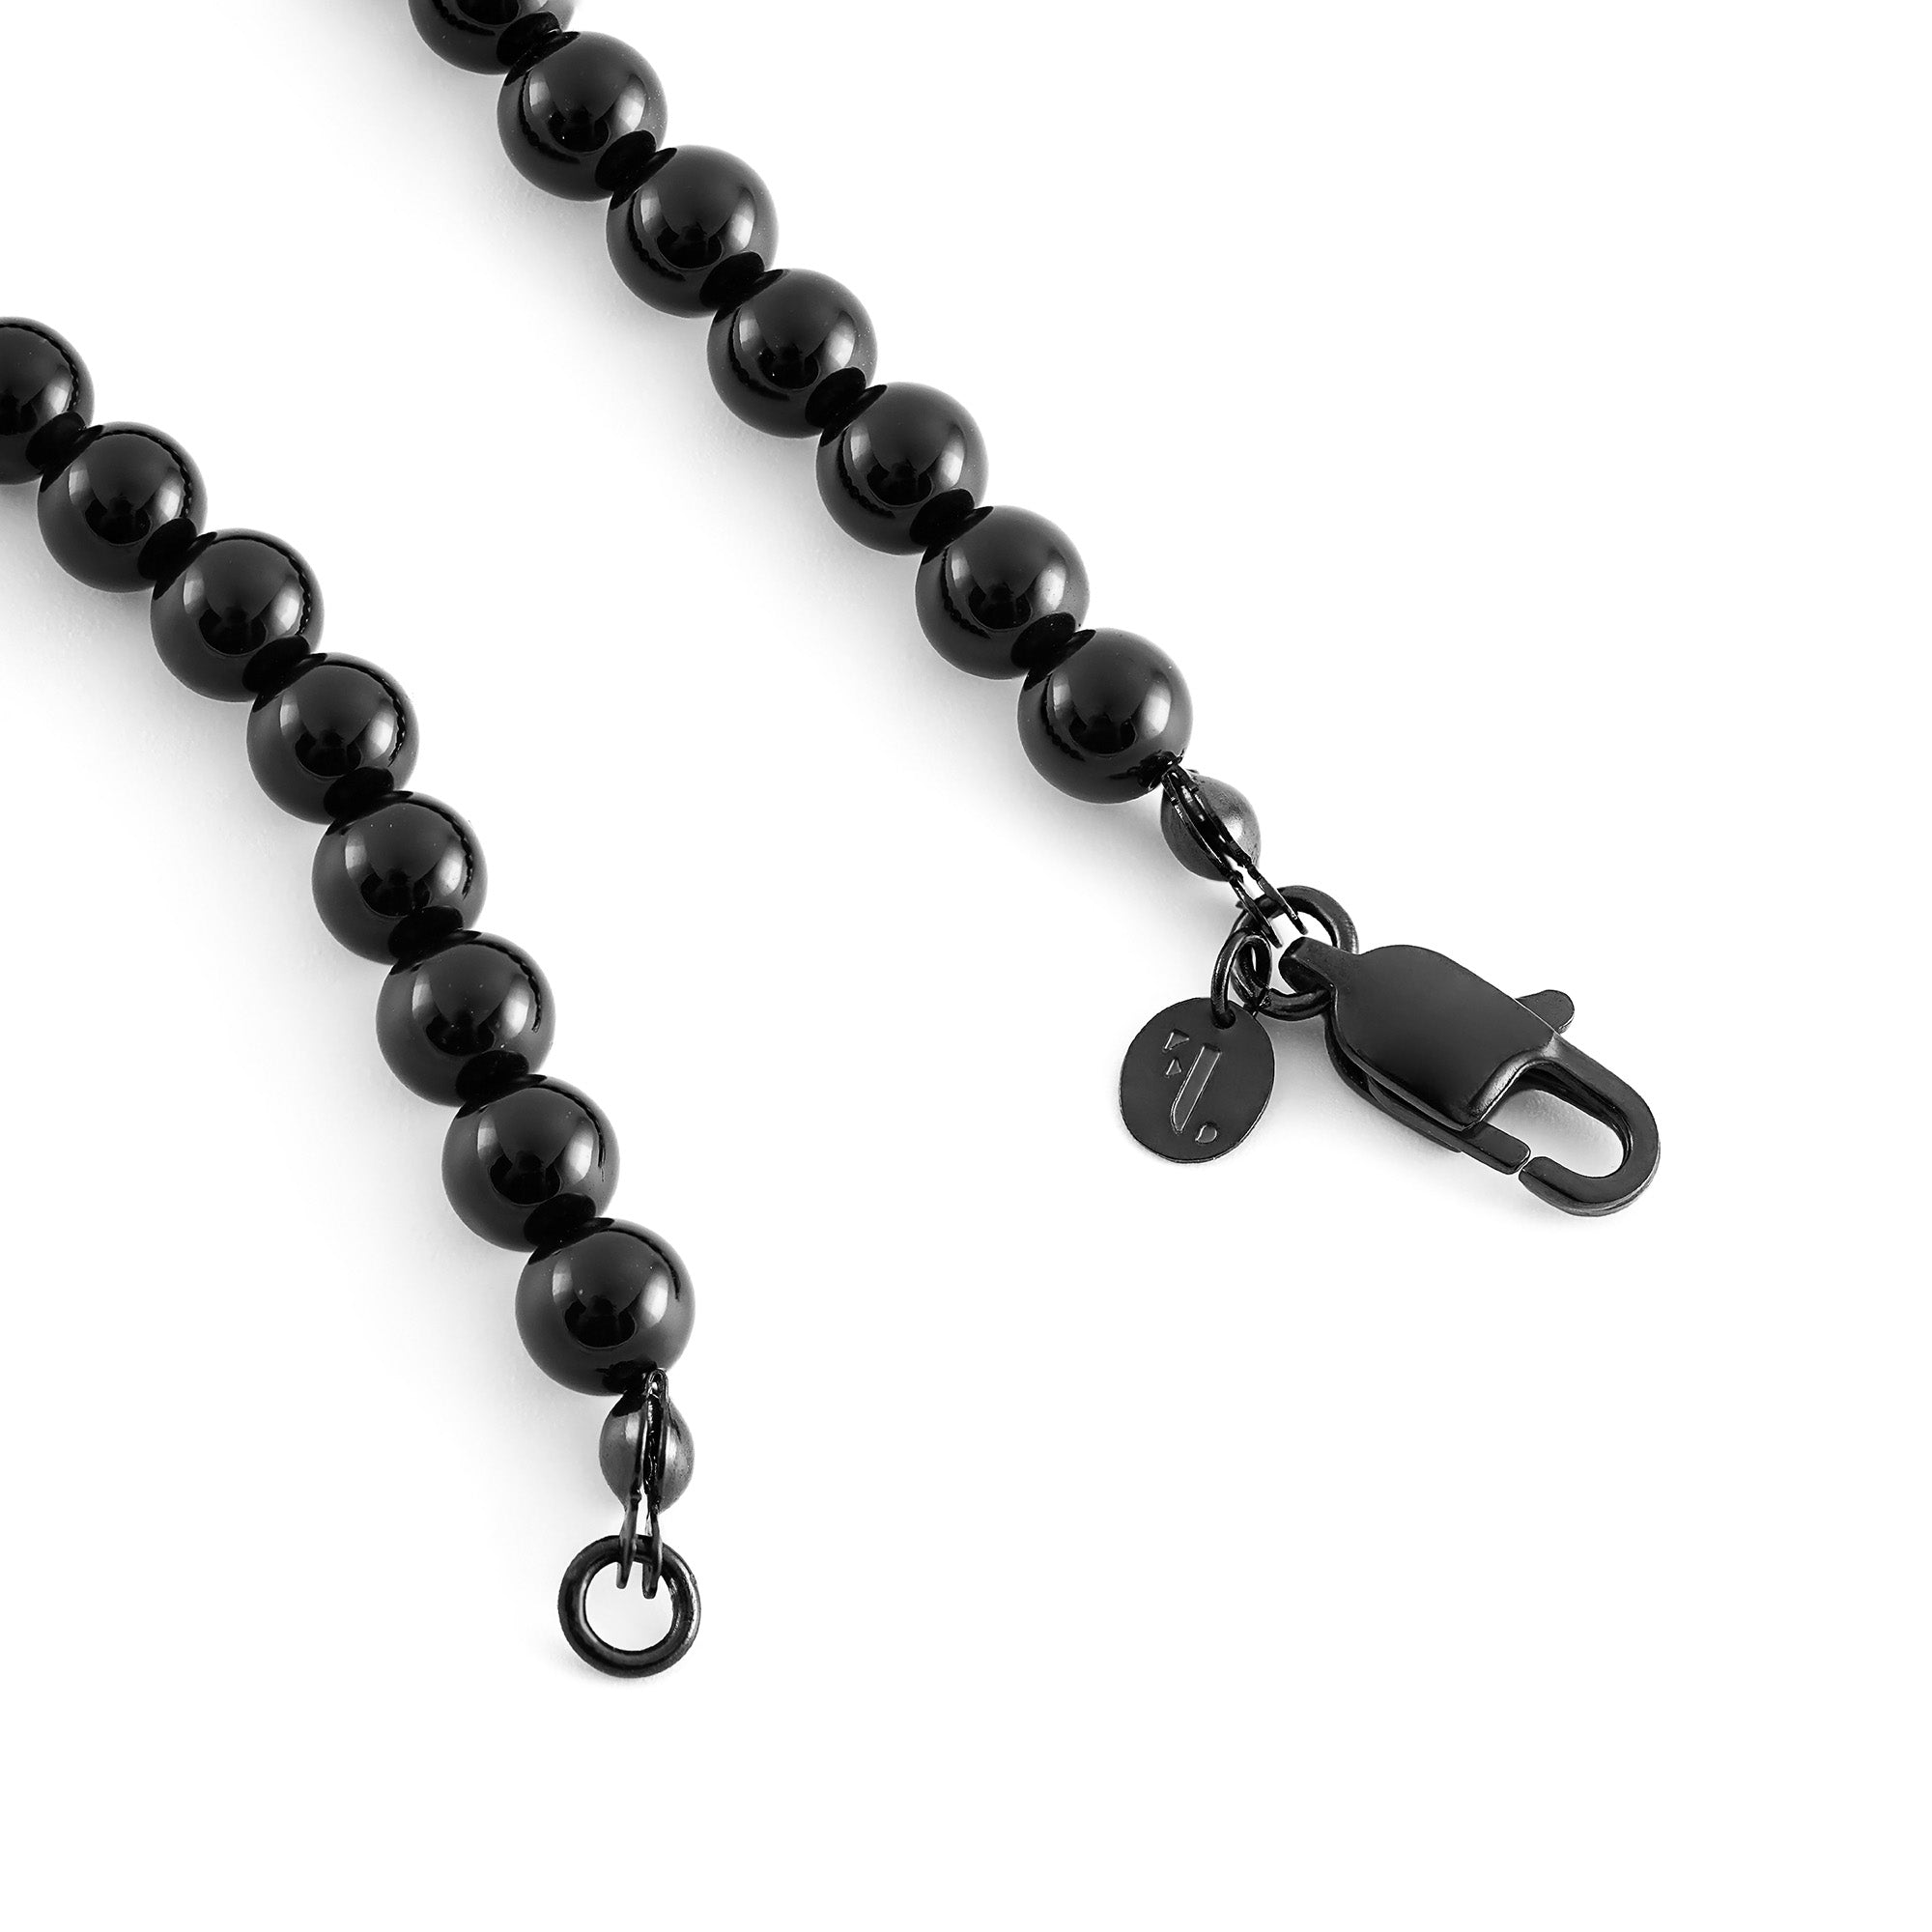 Dark Var women's bracelet by Five Jwlry, crafted with black onyx beads and a black stainless steel buckle. Available in sizes 17cm and 20cm. Made from water-resistant 316L stainless steel. Hypoallergenic with a 2-year warranty.